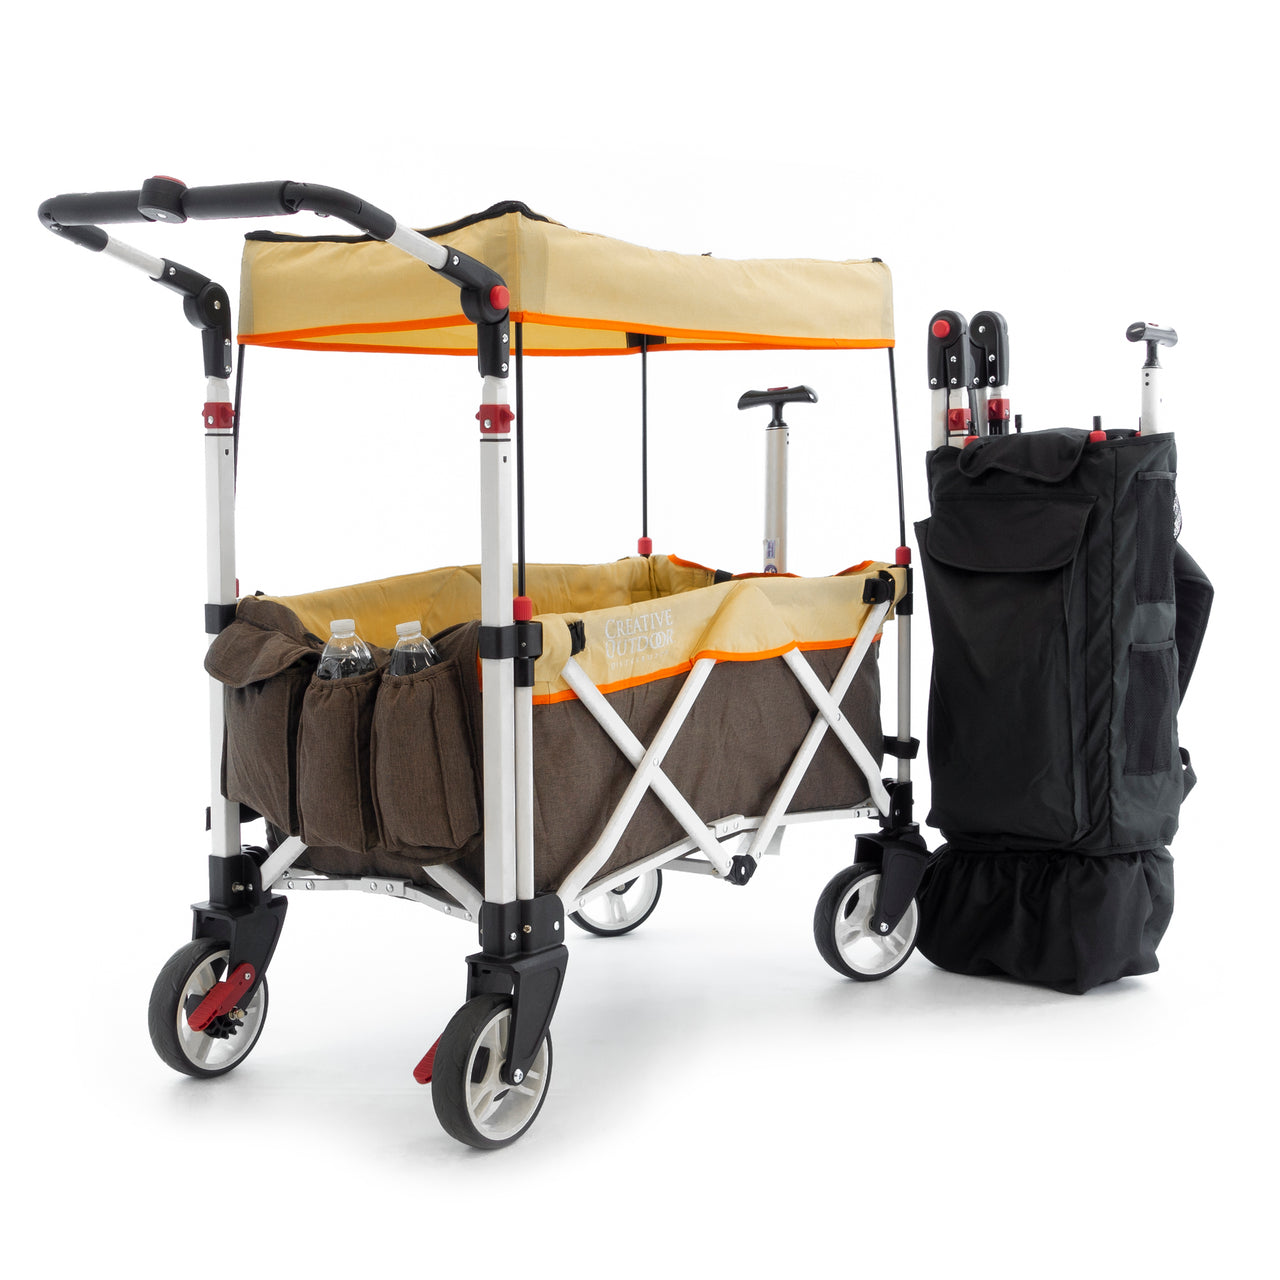 pack-and-push-folding-stroller-wagon-brown-tan